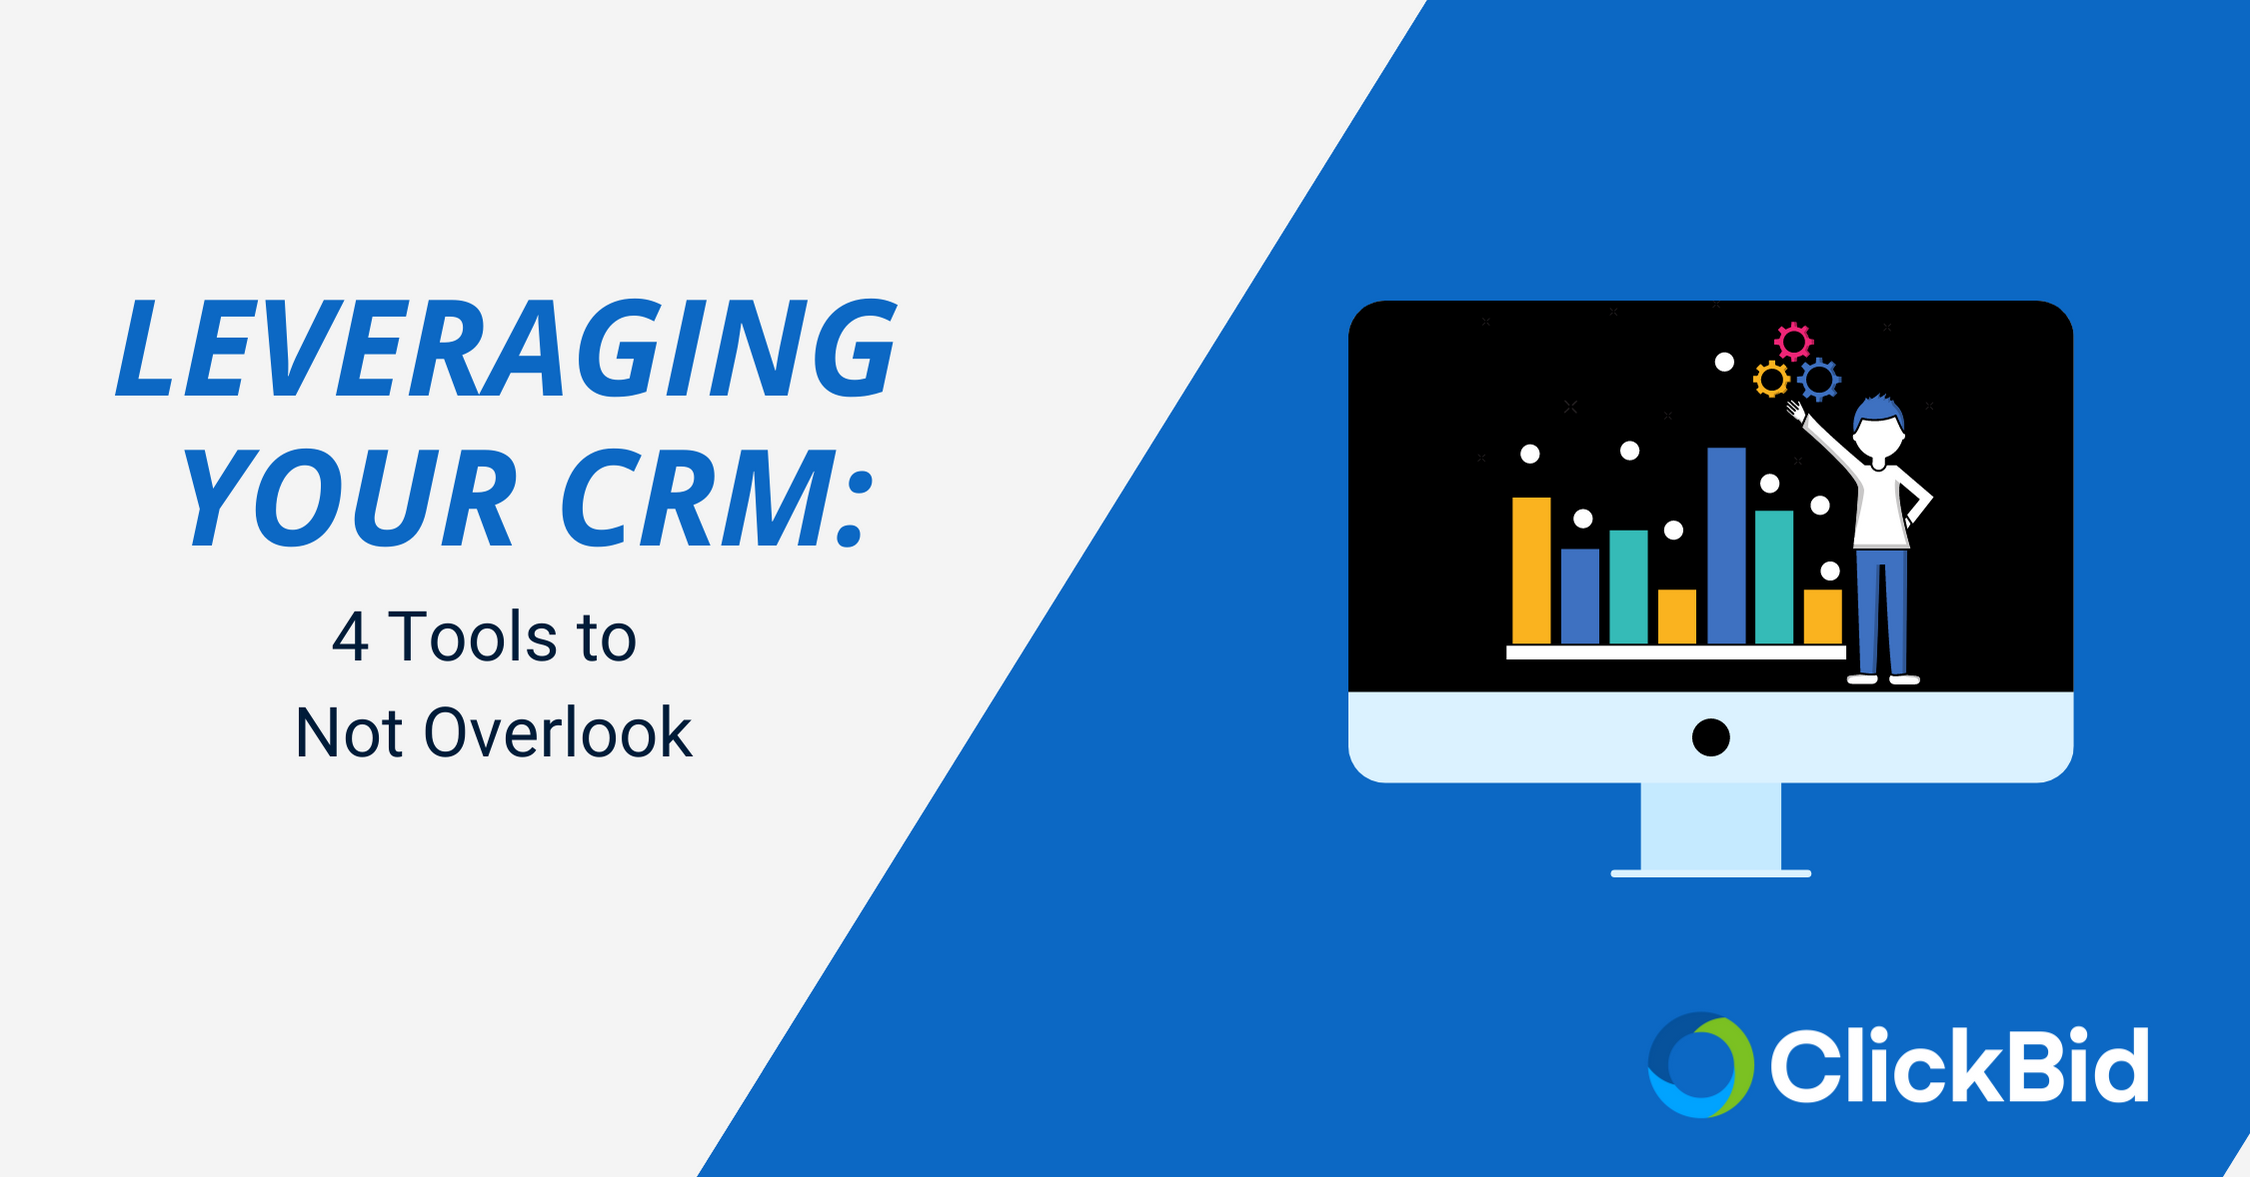 Leveraging Your CRM: 4 Tools to Not Overlook